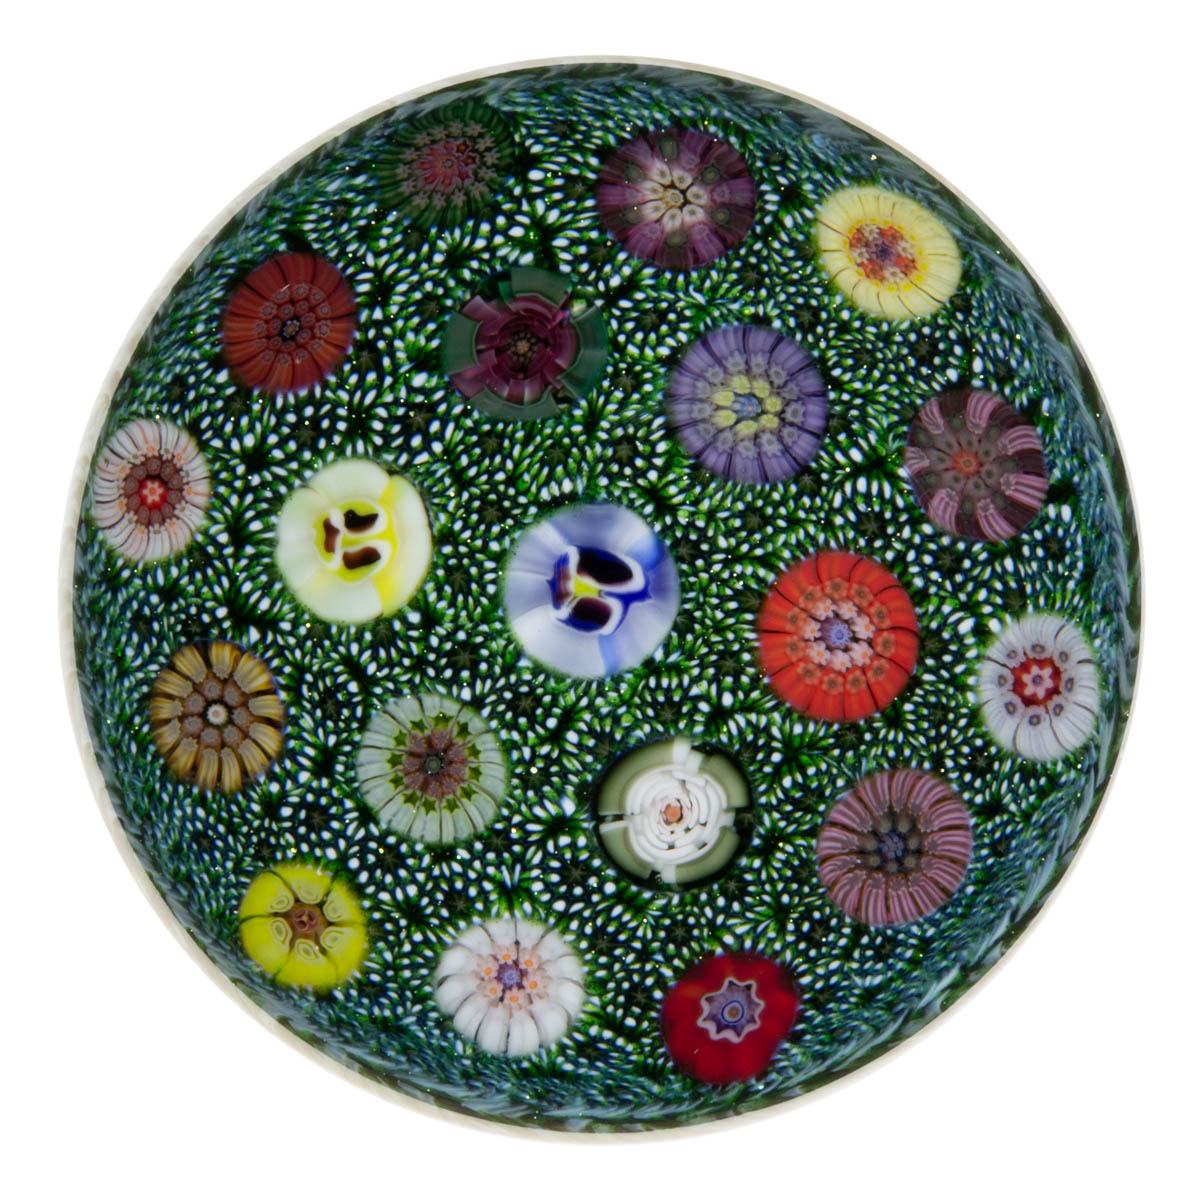 PARABELLE SPACED CONCENTRIC MILLEFIORI STUDIO ART GLASS PAPERWEIGHT